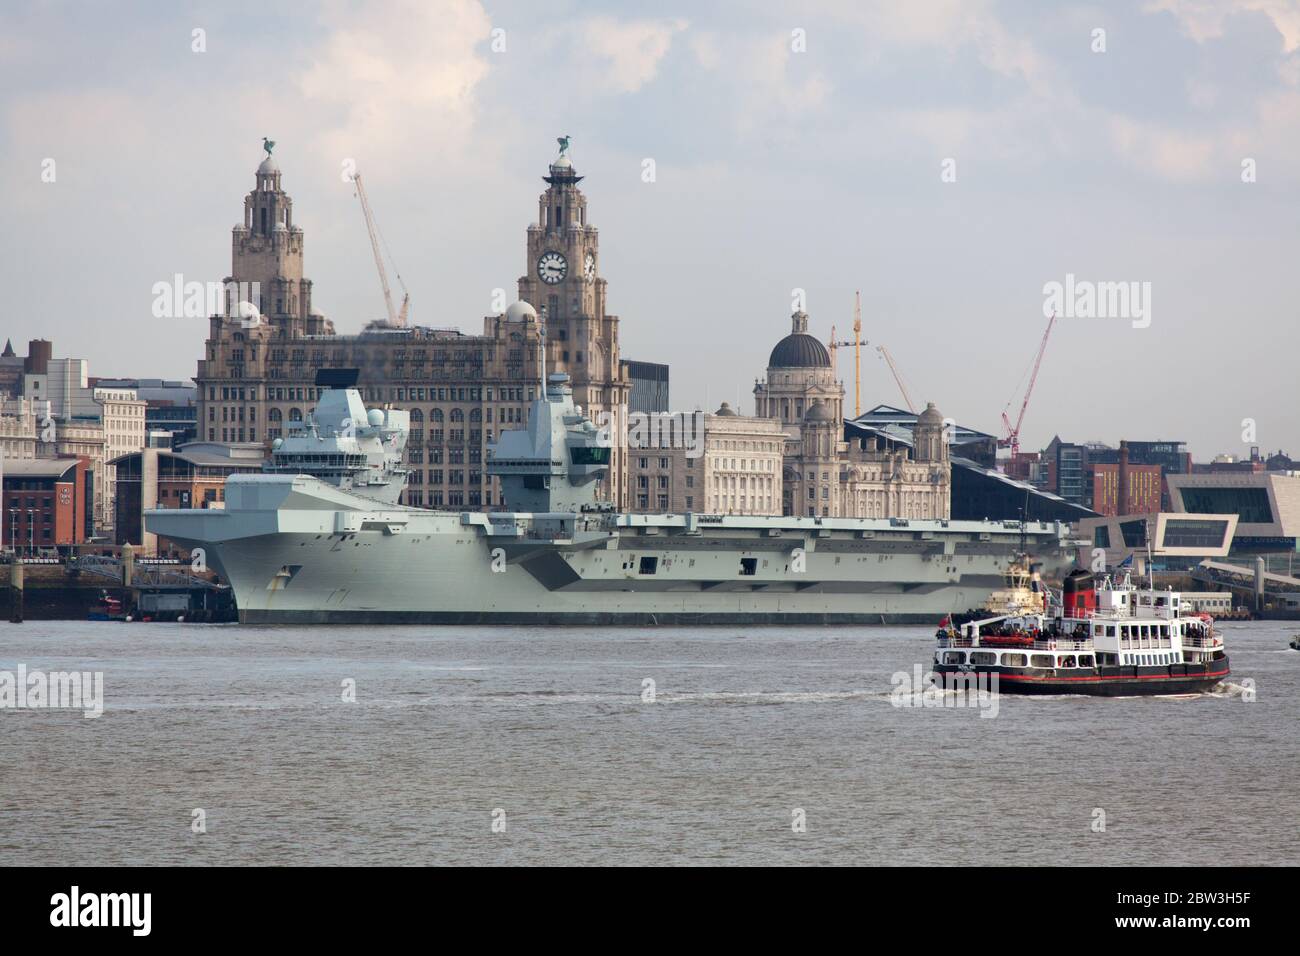 City of Liverpool, England. View of the HMS Queen Elizabeth berthed at Liverpool’s cruise terminal, with the Cunard buildings in the background. Stock Photo